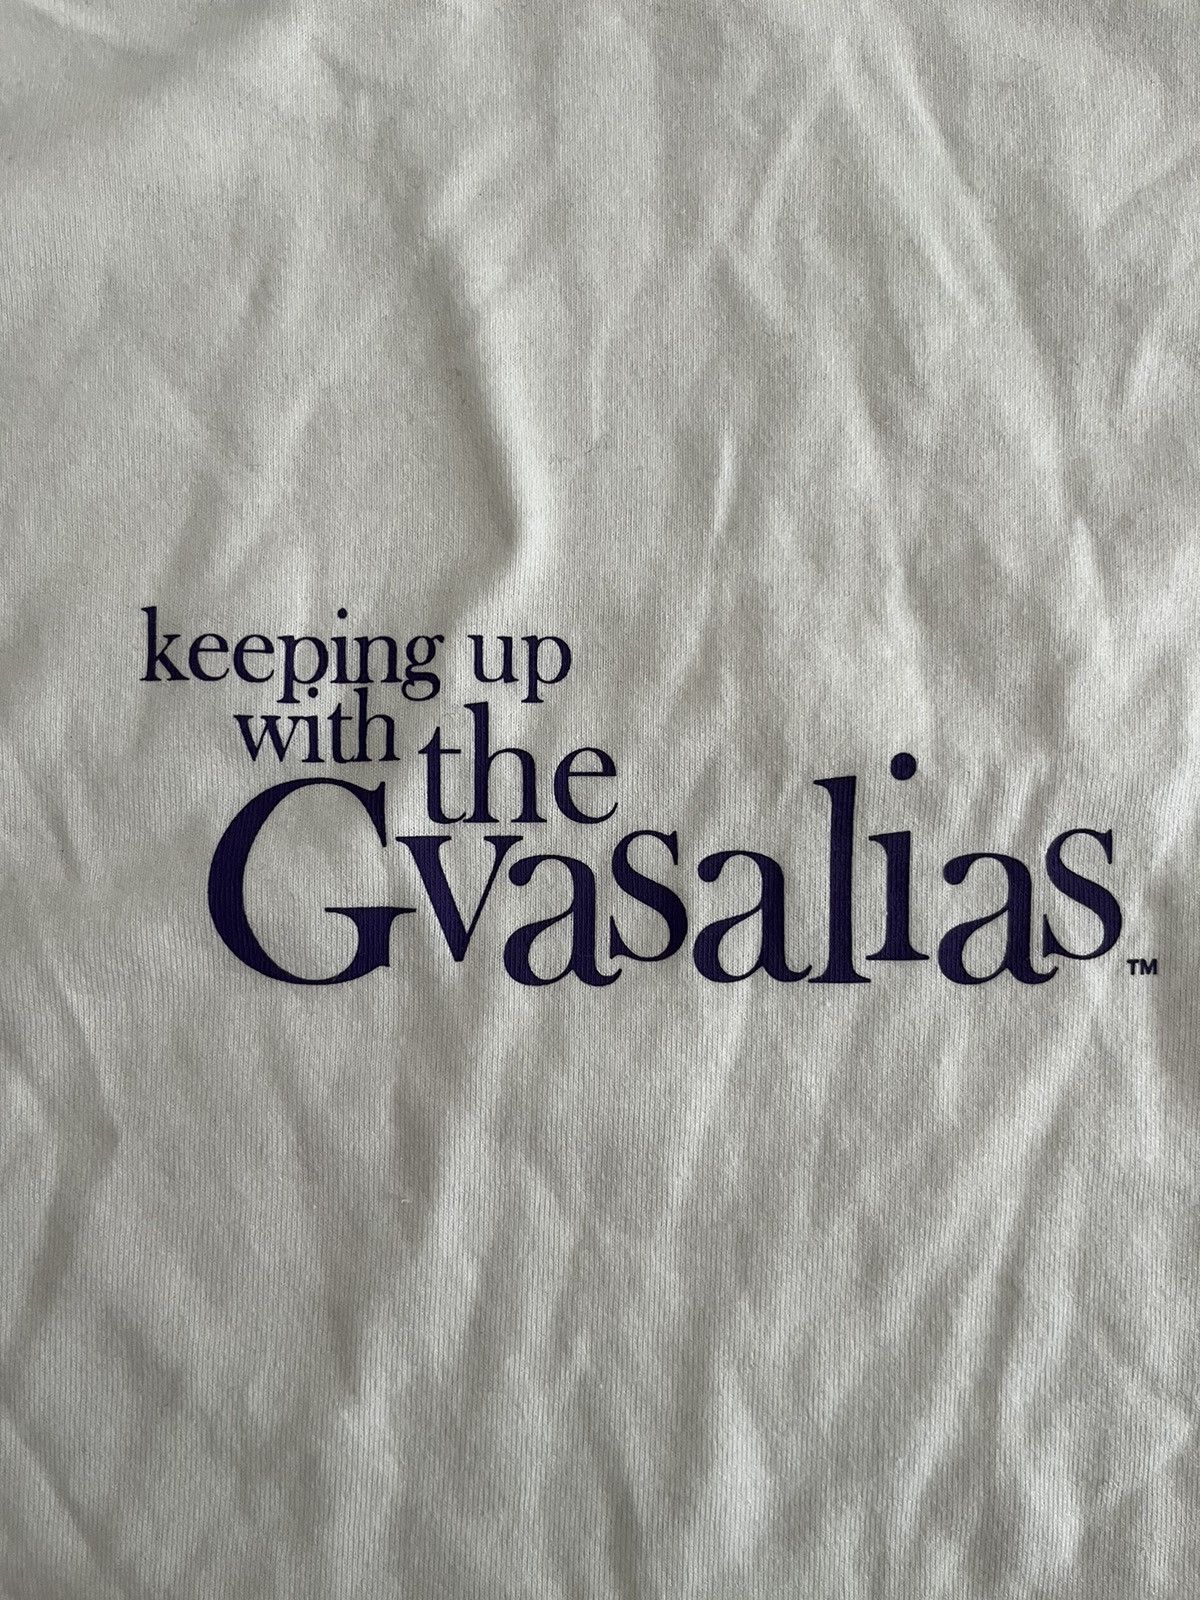 NWT - Vetements "Keeping up with the Gvasalias" T-shirt - 2